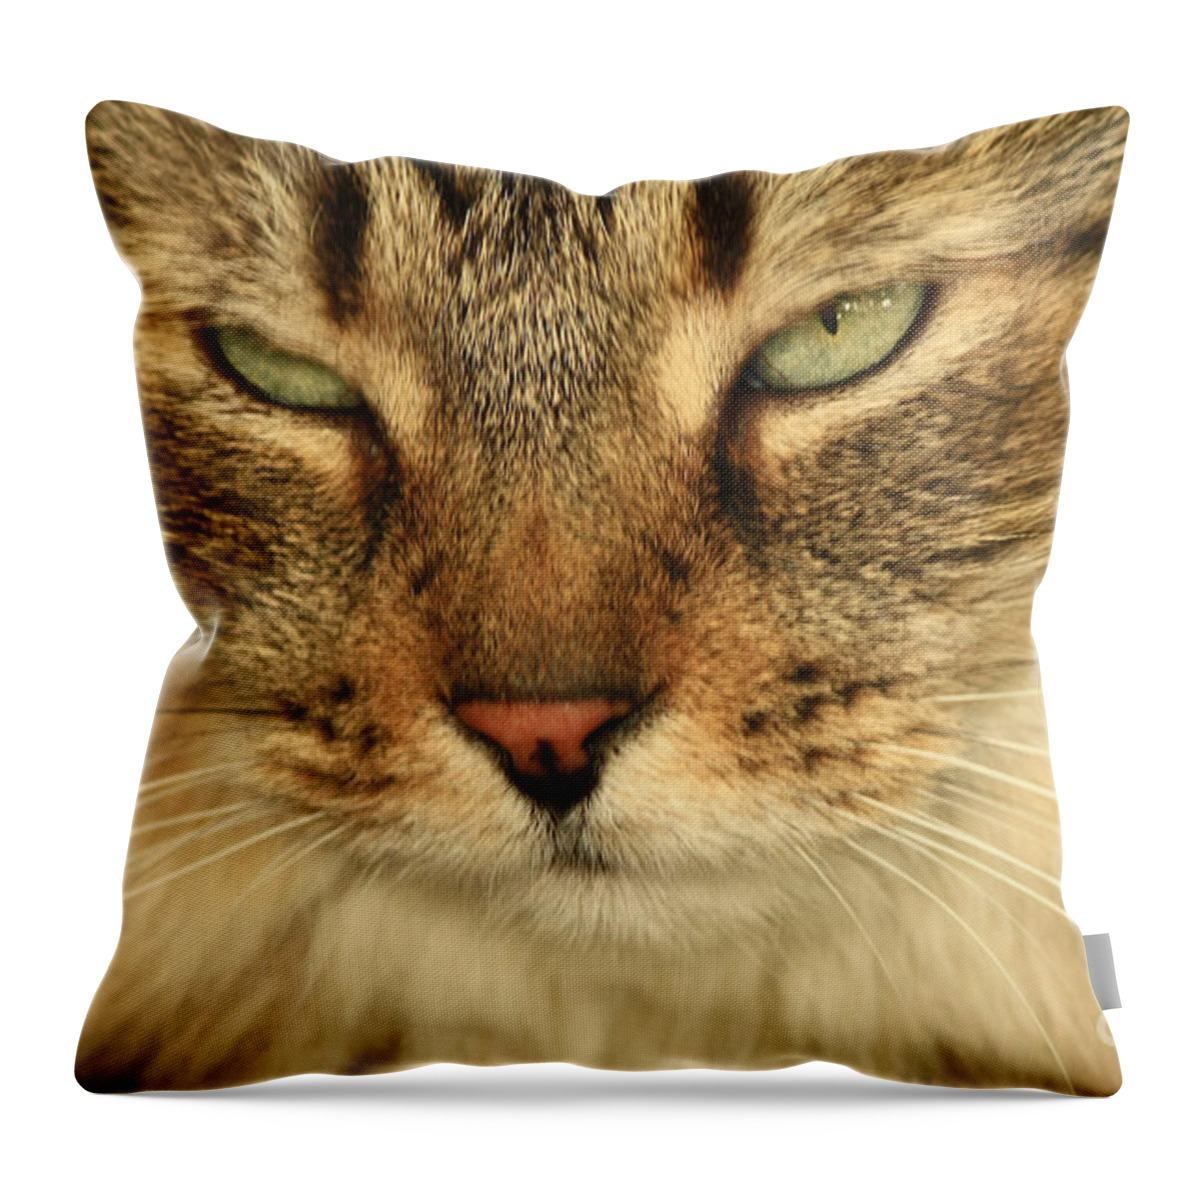 My Friend's Cat Throw Pillow featuring the photograph My Friend's Cat by Inspired Nature Photography Fine Art Photography